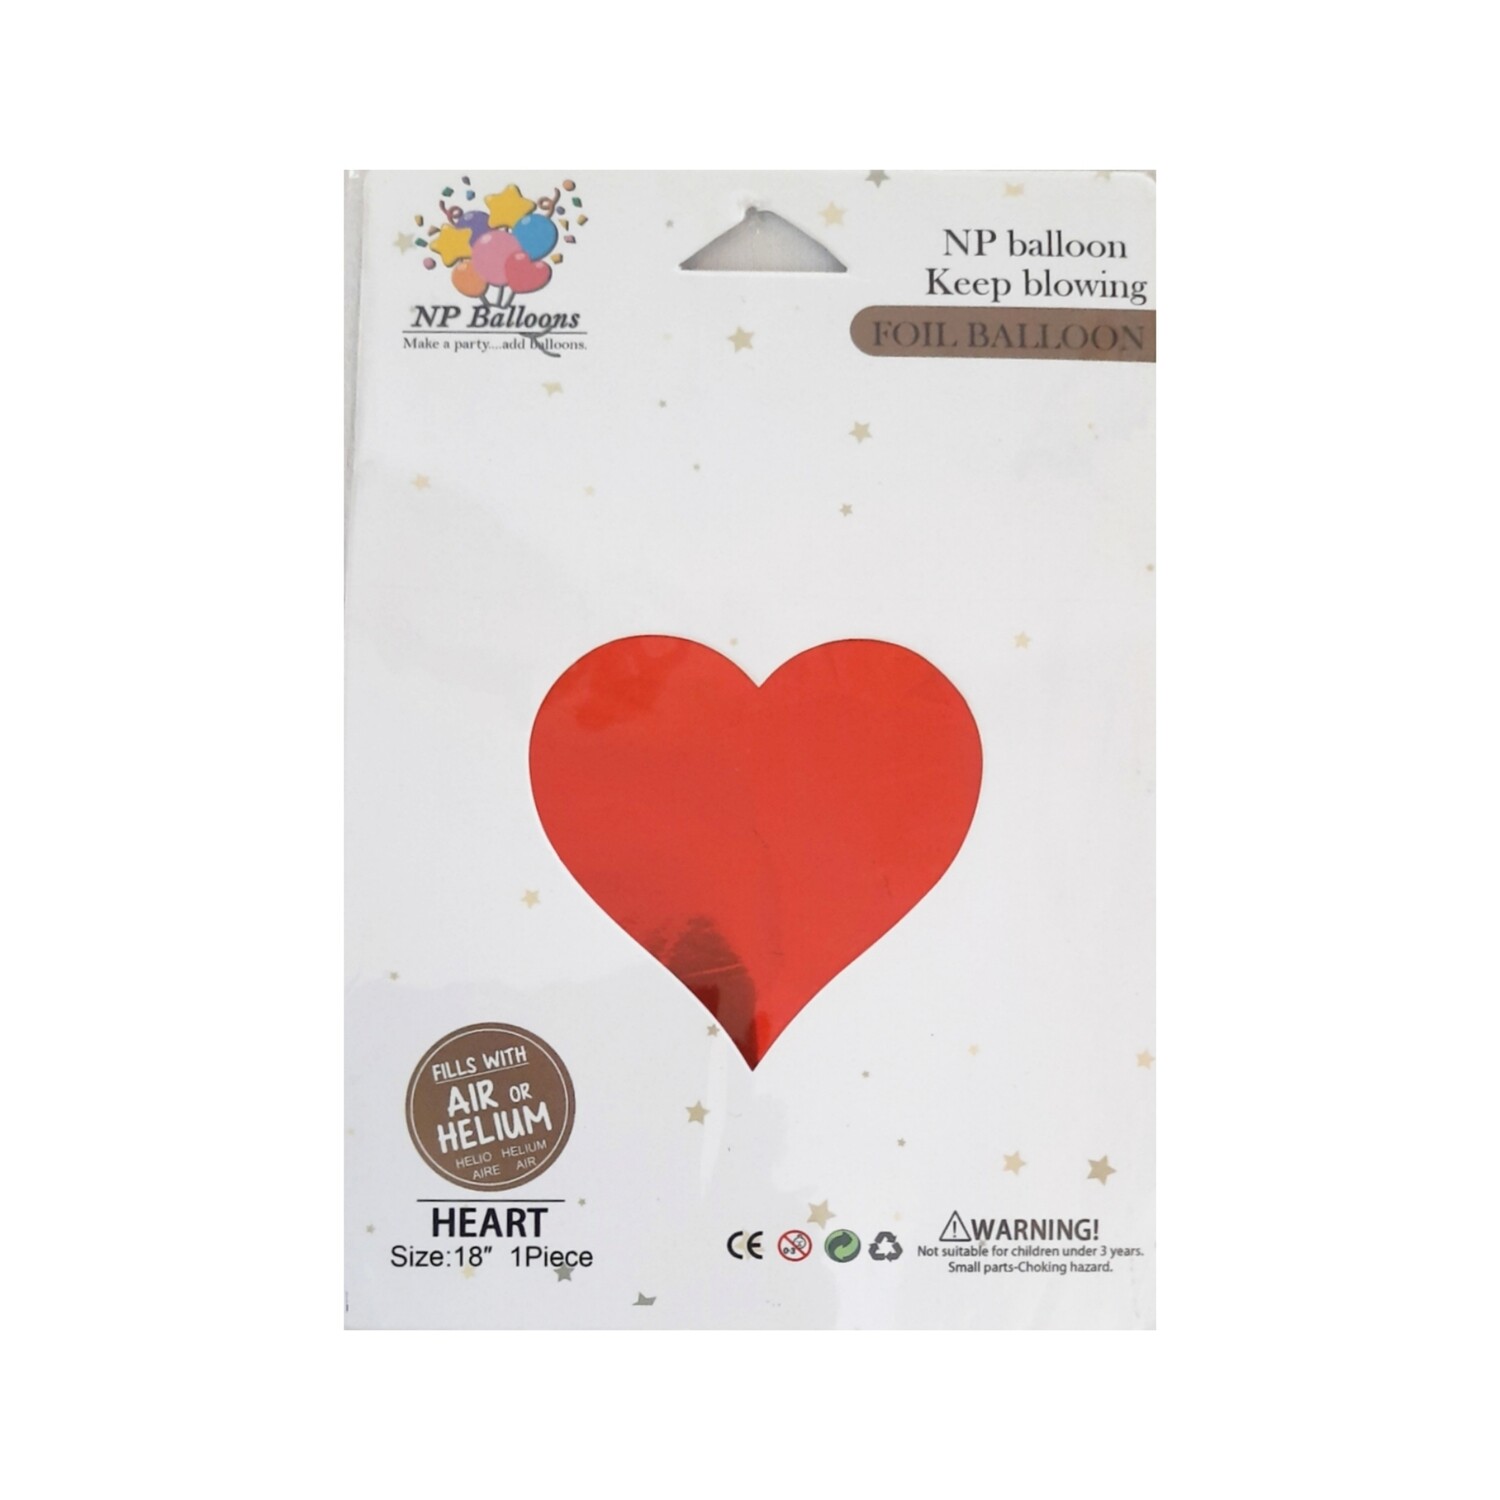 18 Inch Heart Shape Red Foil Balloon (Fills With Air or Helium)